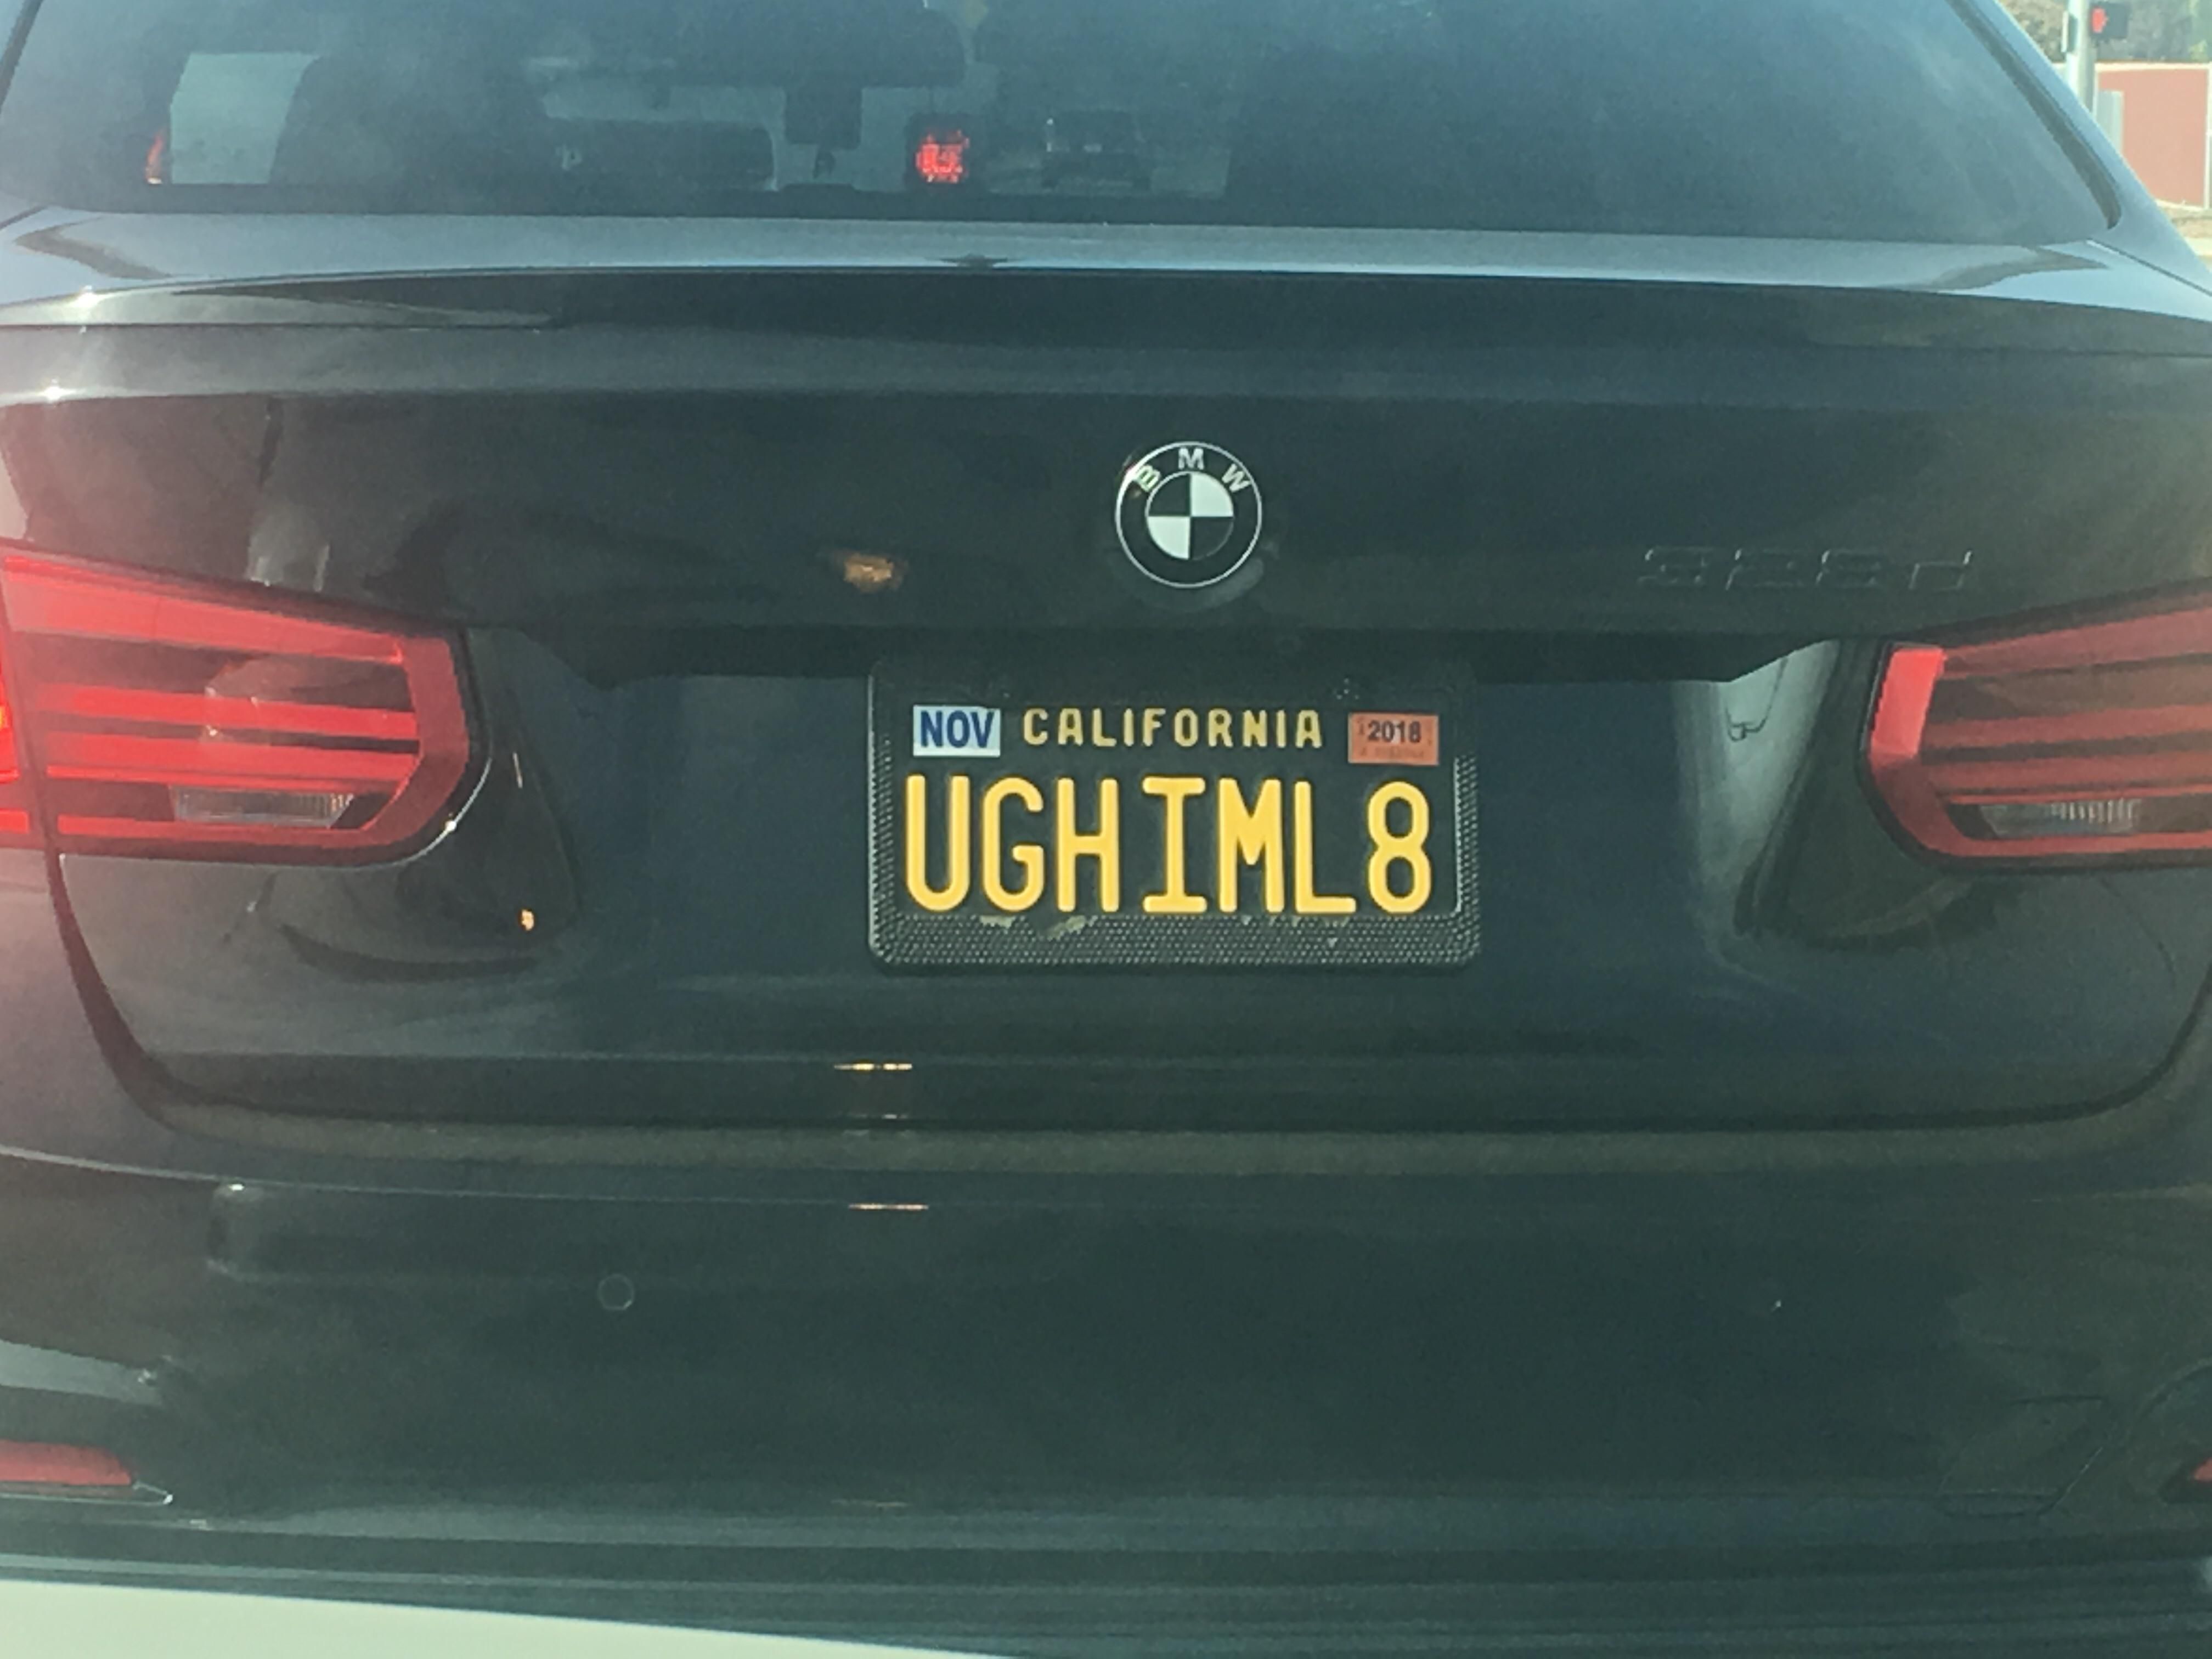 This license plate I found